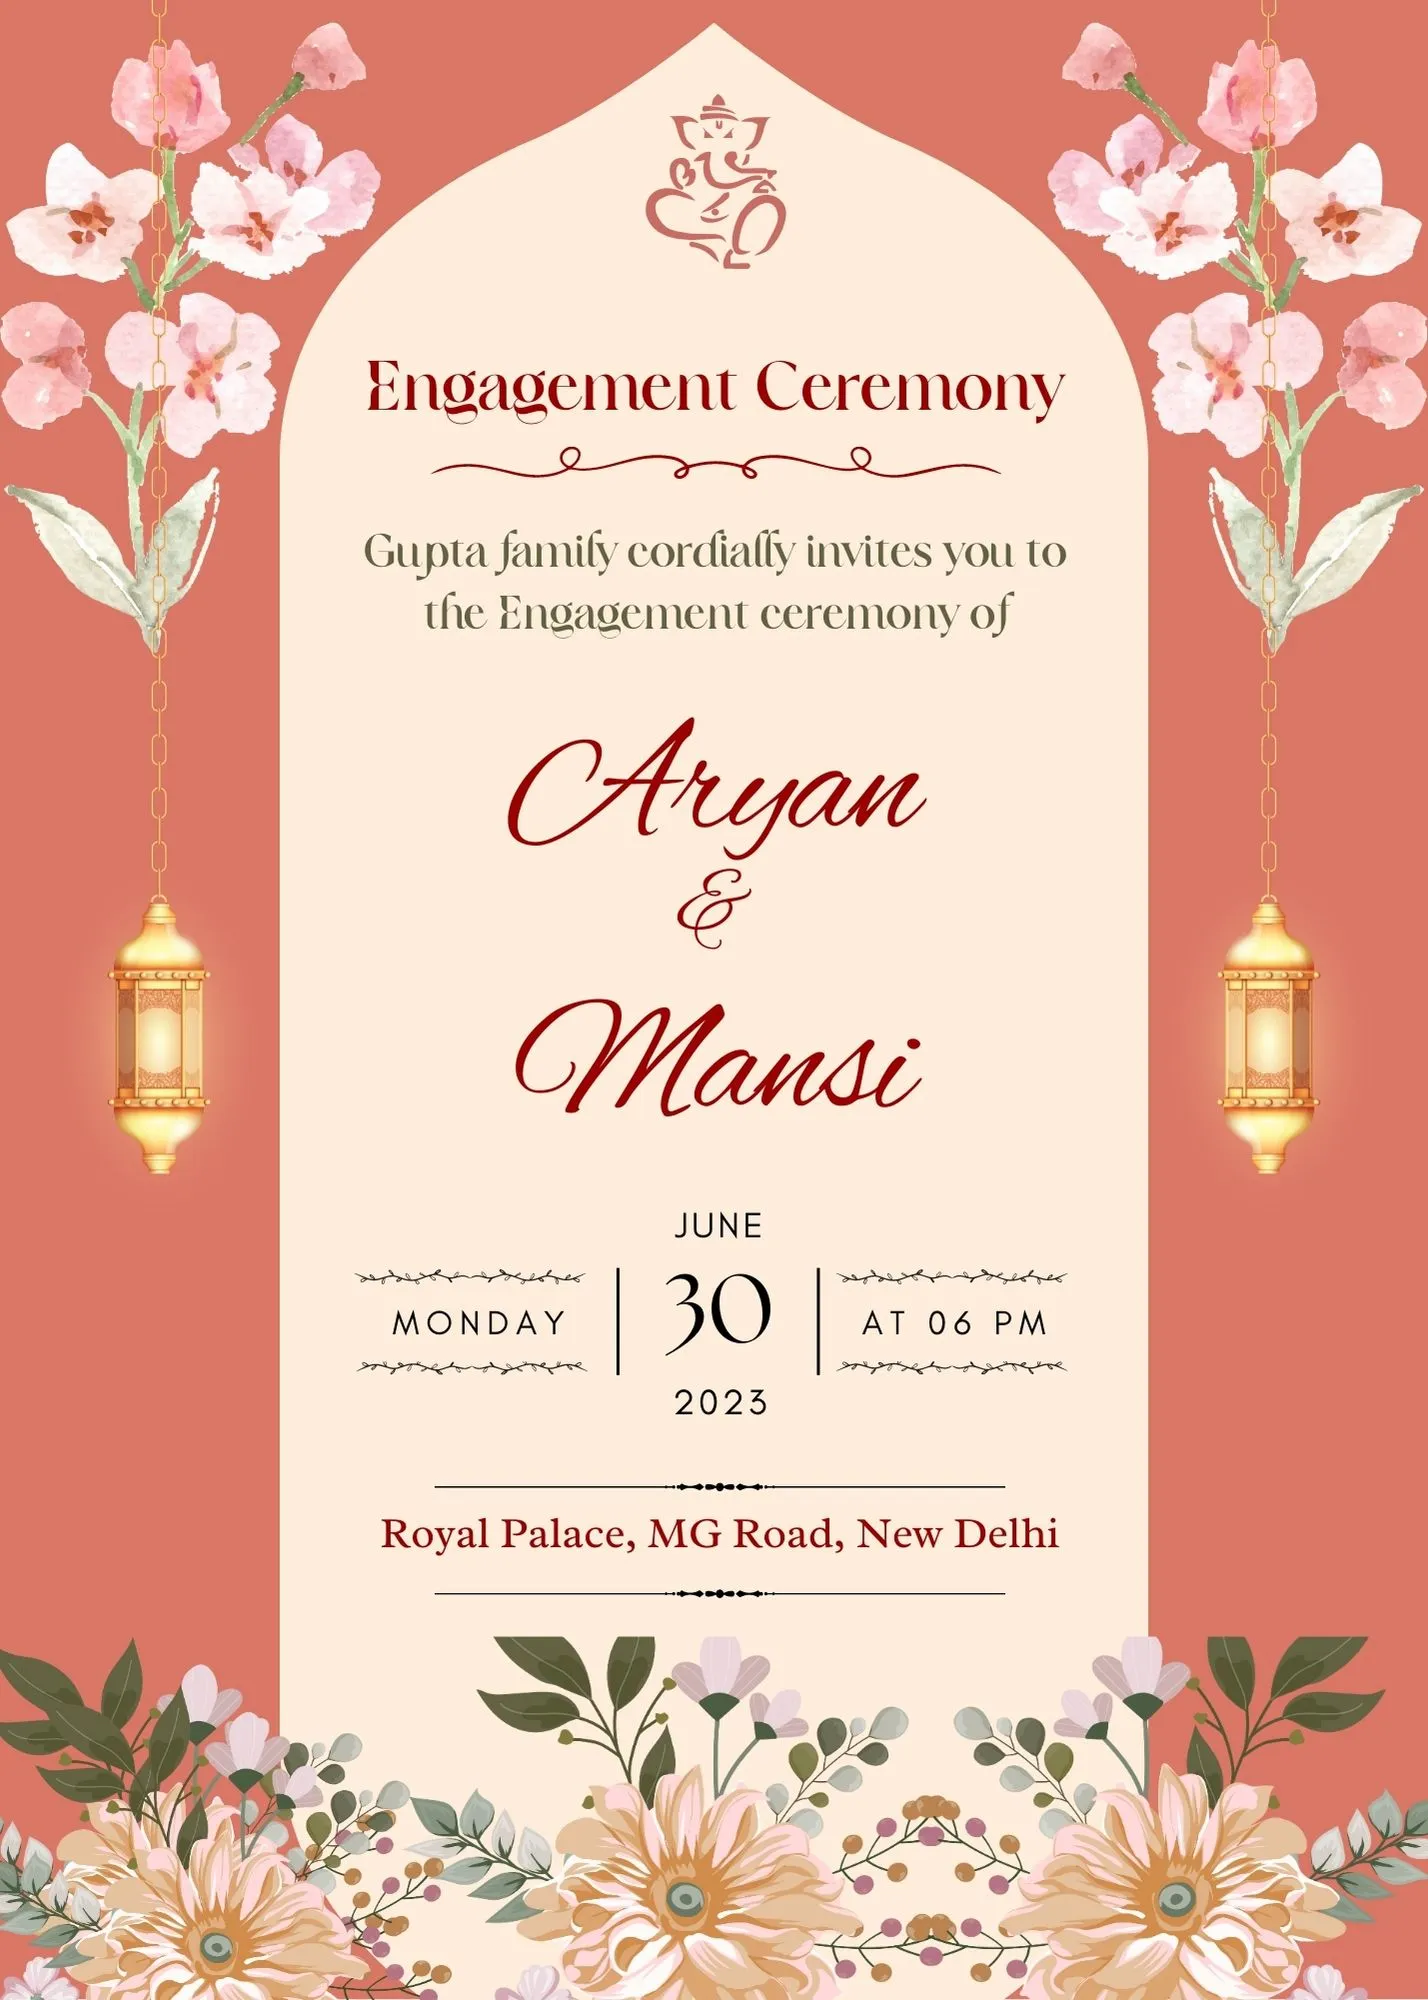 Engagement Ceremony Invitation Template - Download in Word, Illustrator,  PSD, Apple Pages, Publisher, Outlook | Template.net